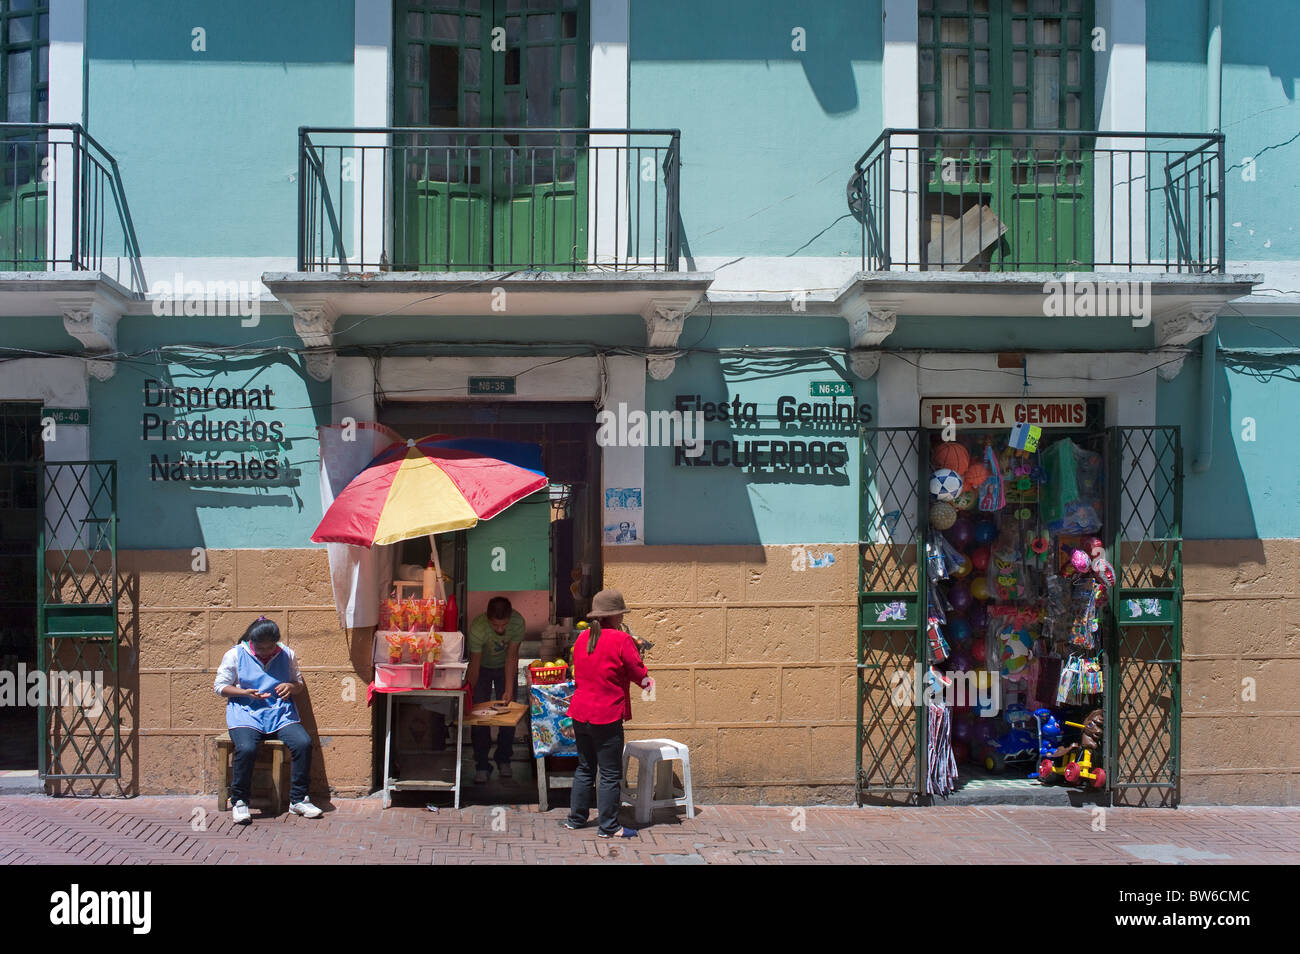 Building with shops, women selling things, Quito, Ecuador Stock Photo